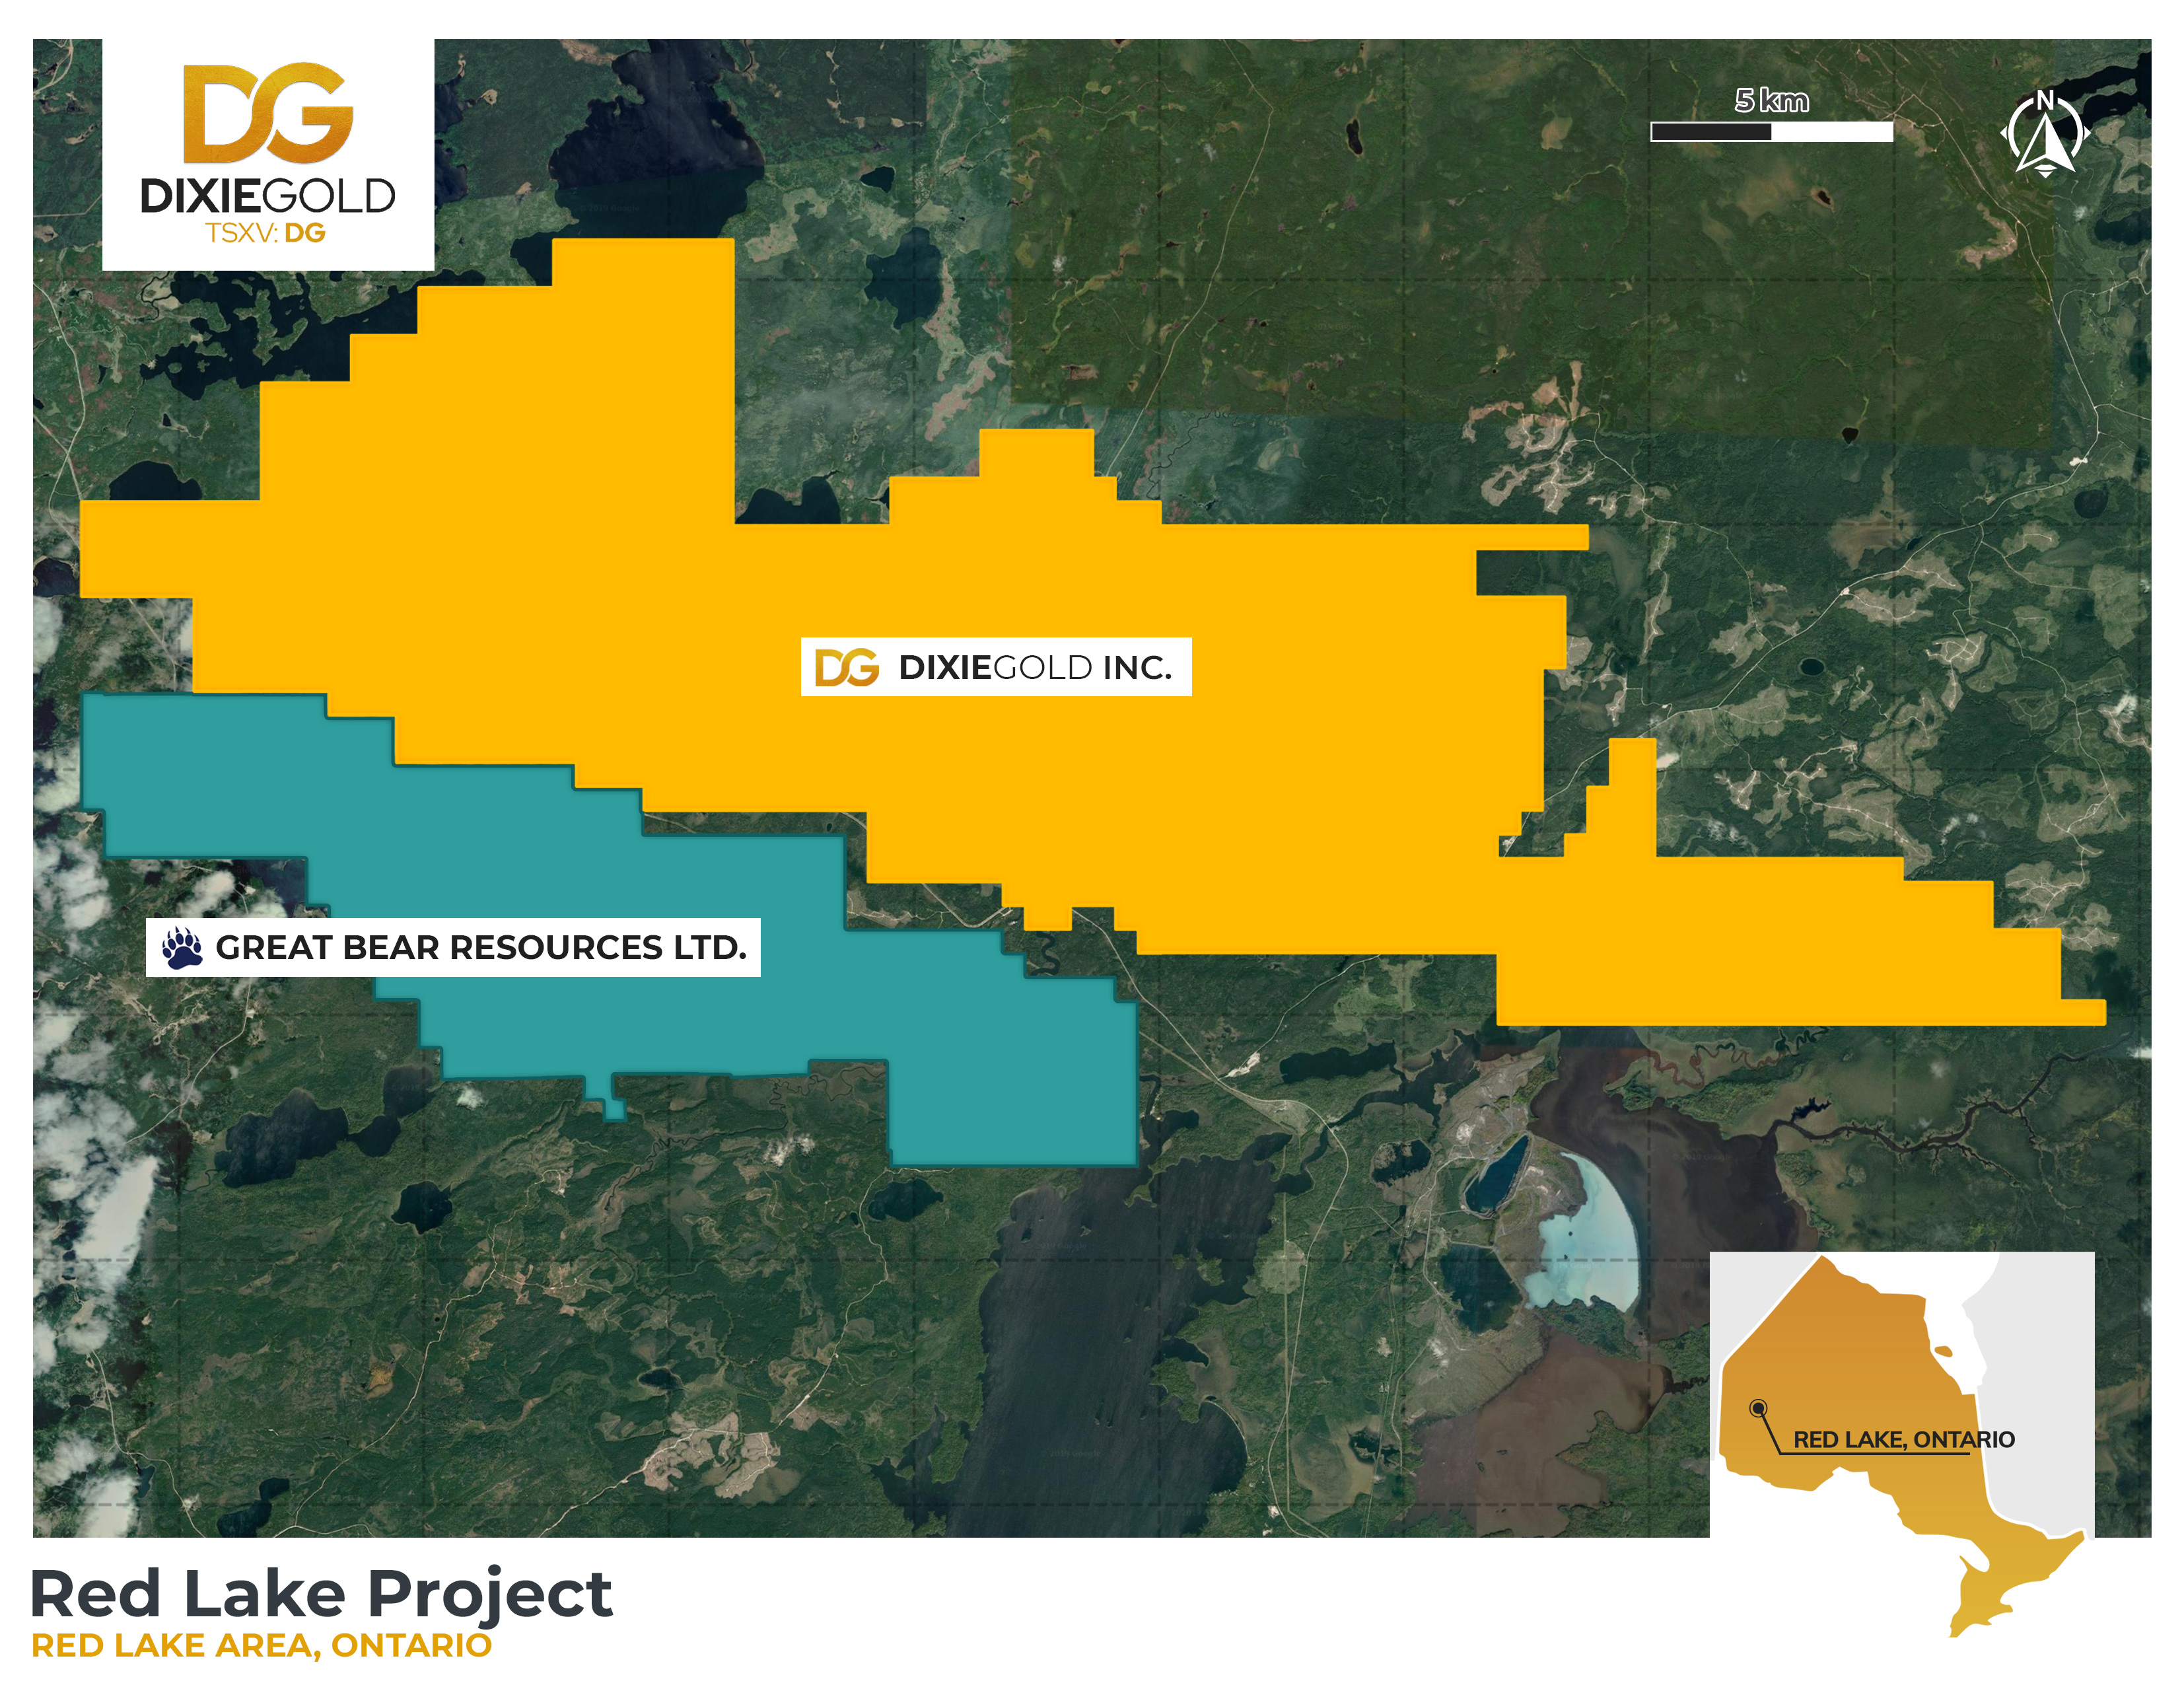 Figure 1: Dixie Gold Inc. - Red Lake Gold Project Map